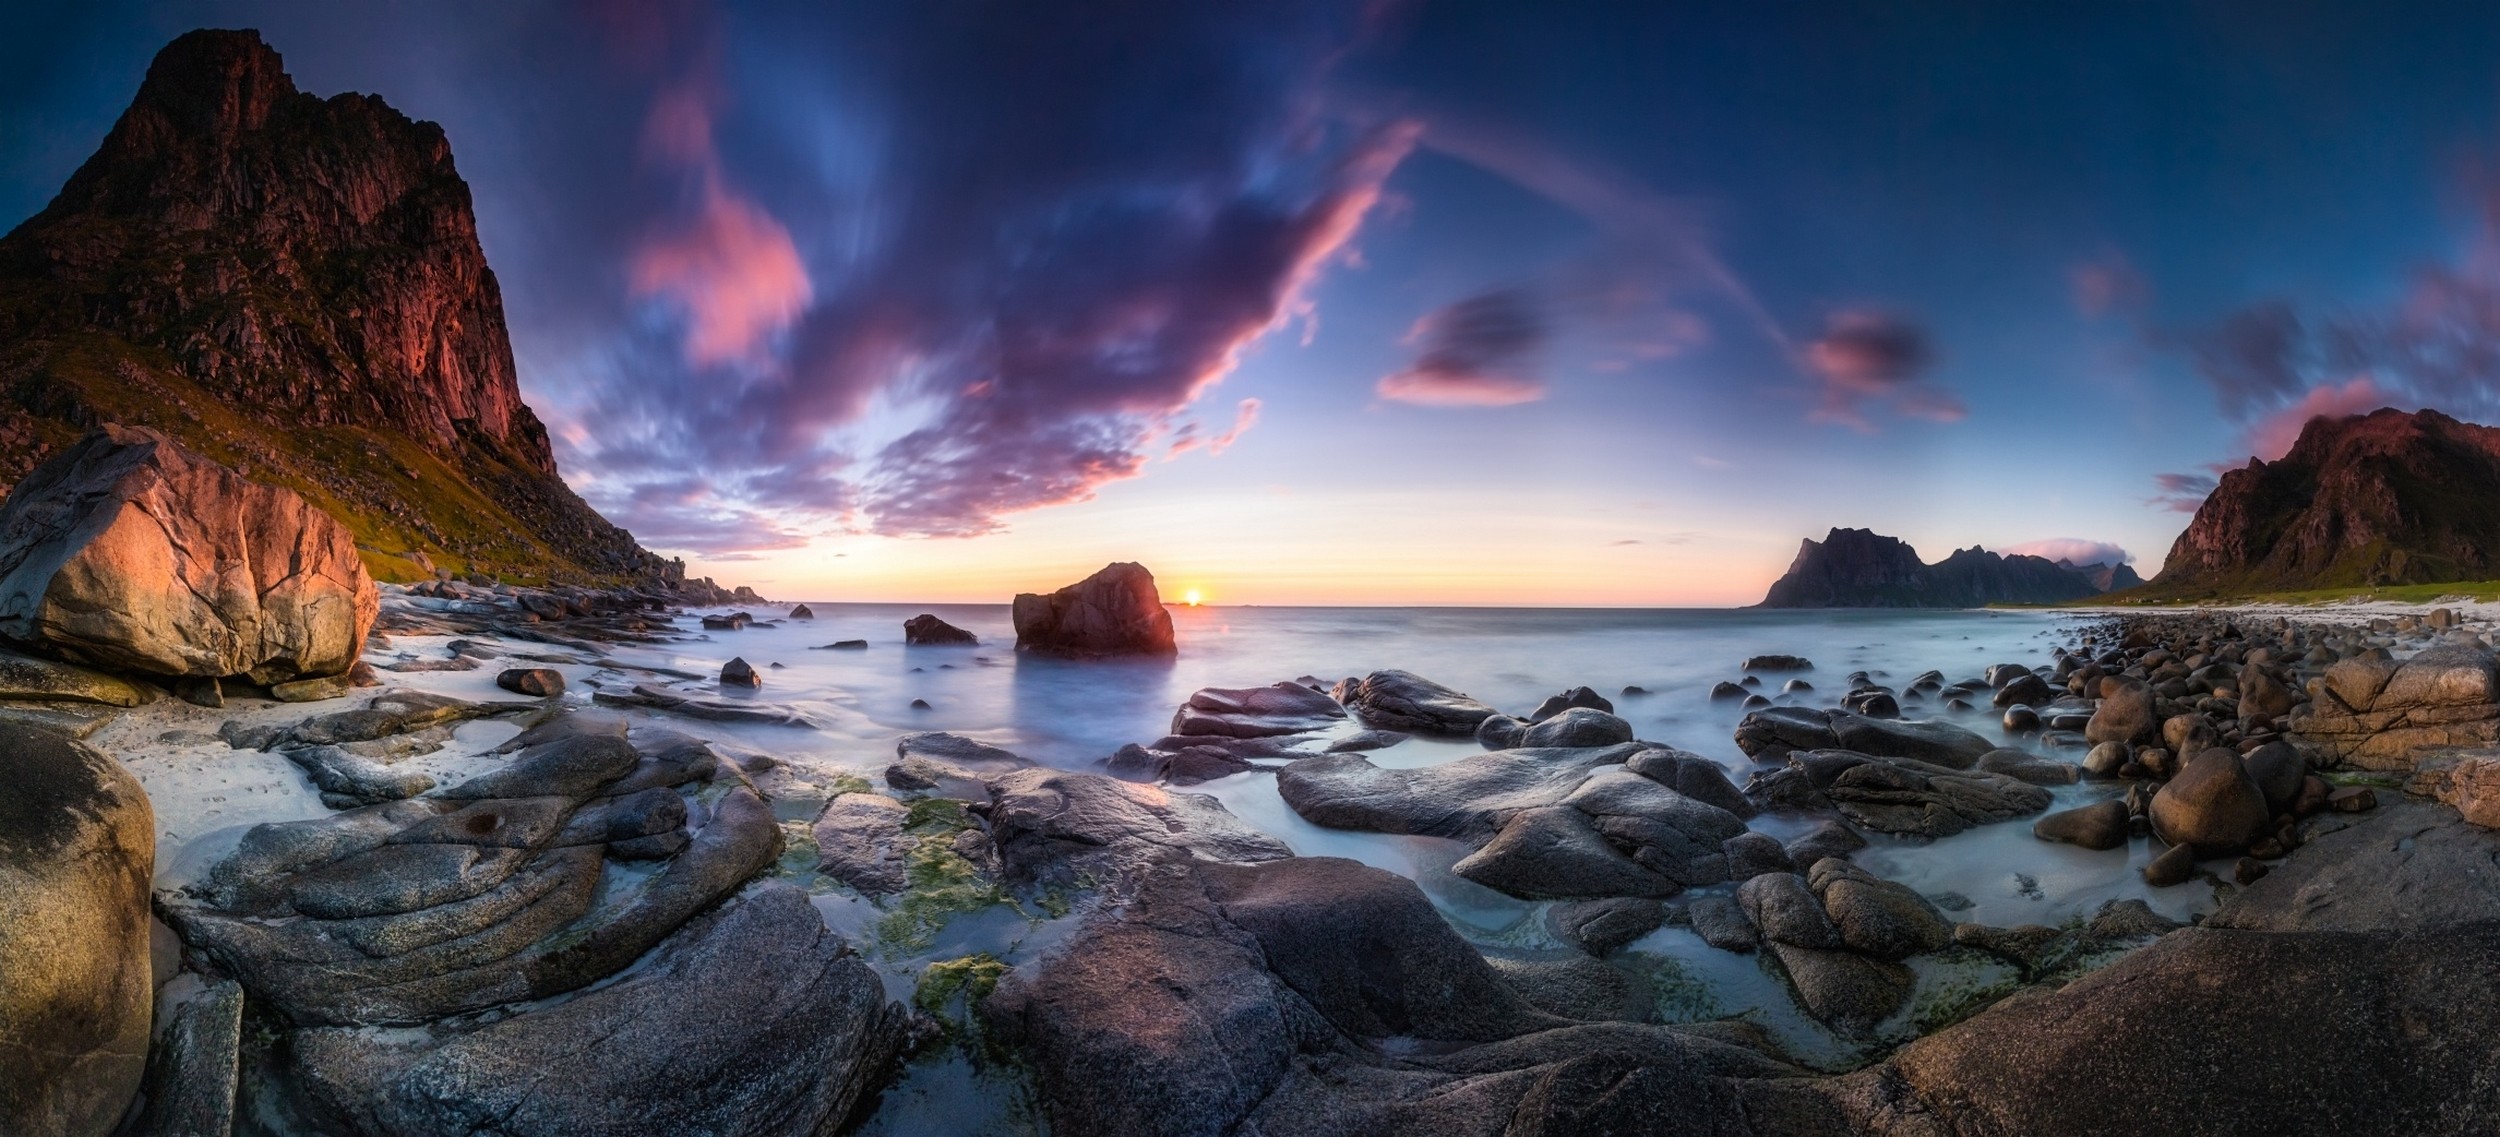 General 2500x1137 long exposure sunset beach cliff clouds rock sea Norway nature landscape yellow blue coast